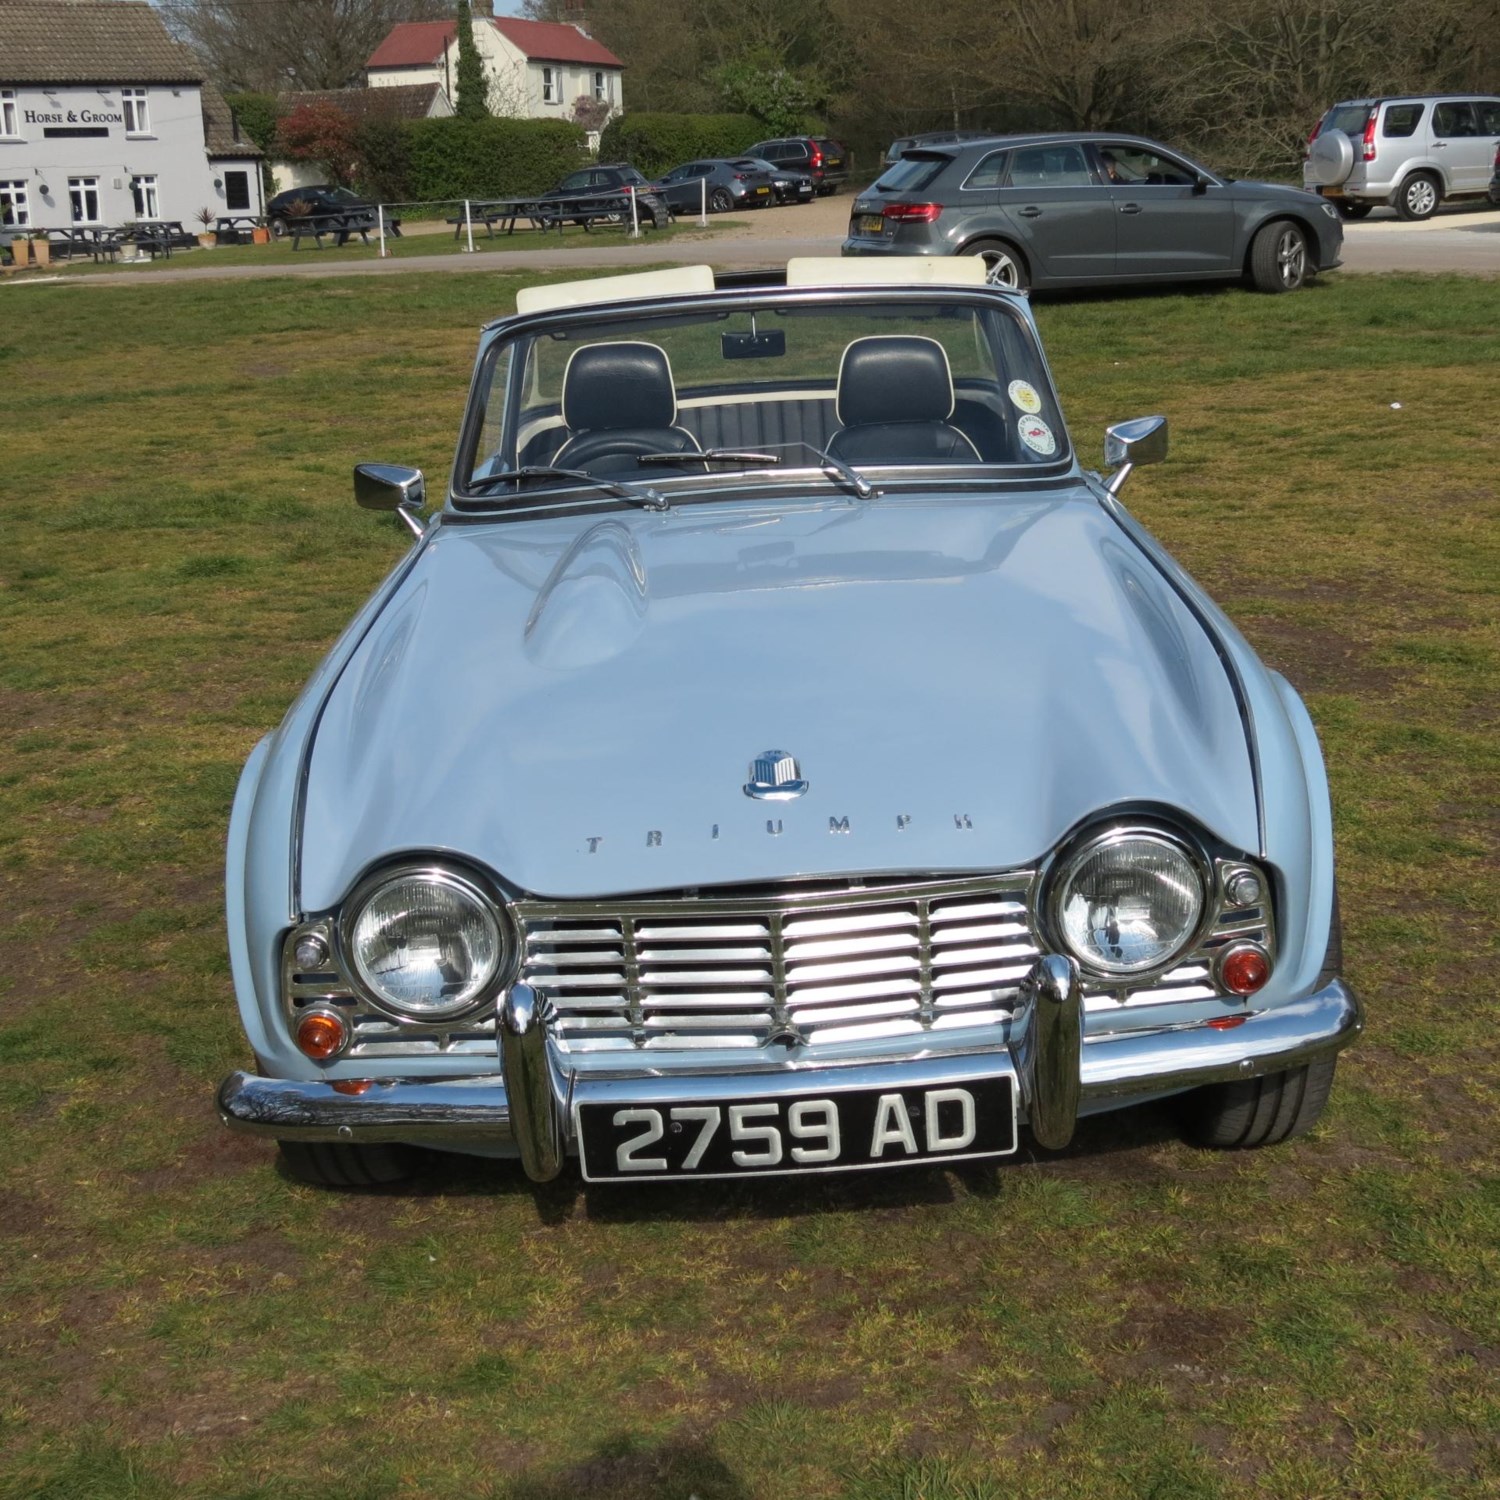 Classic Cars for Sale UK | Classifieds for Vintage Cars